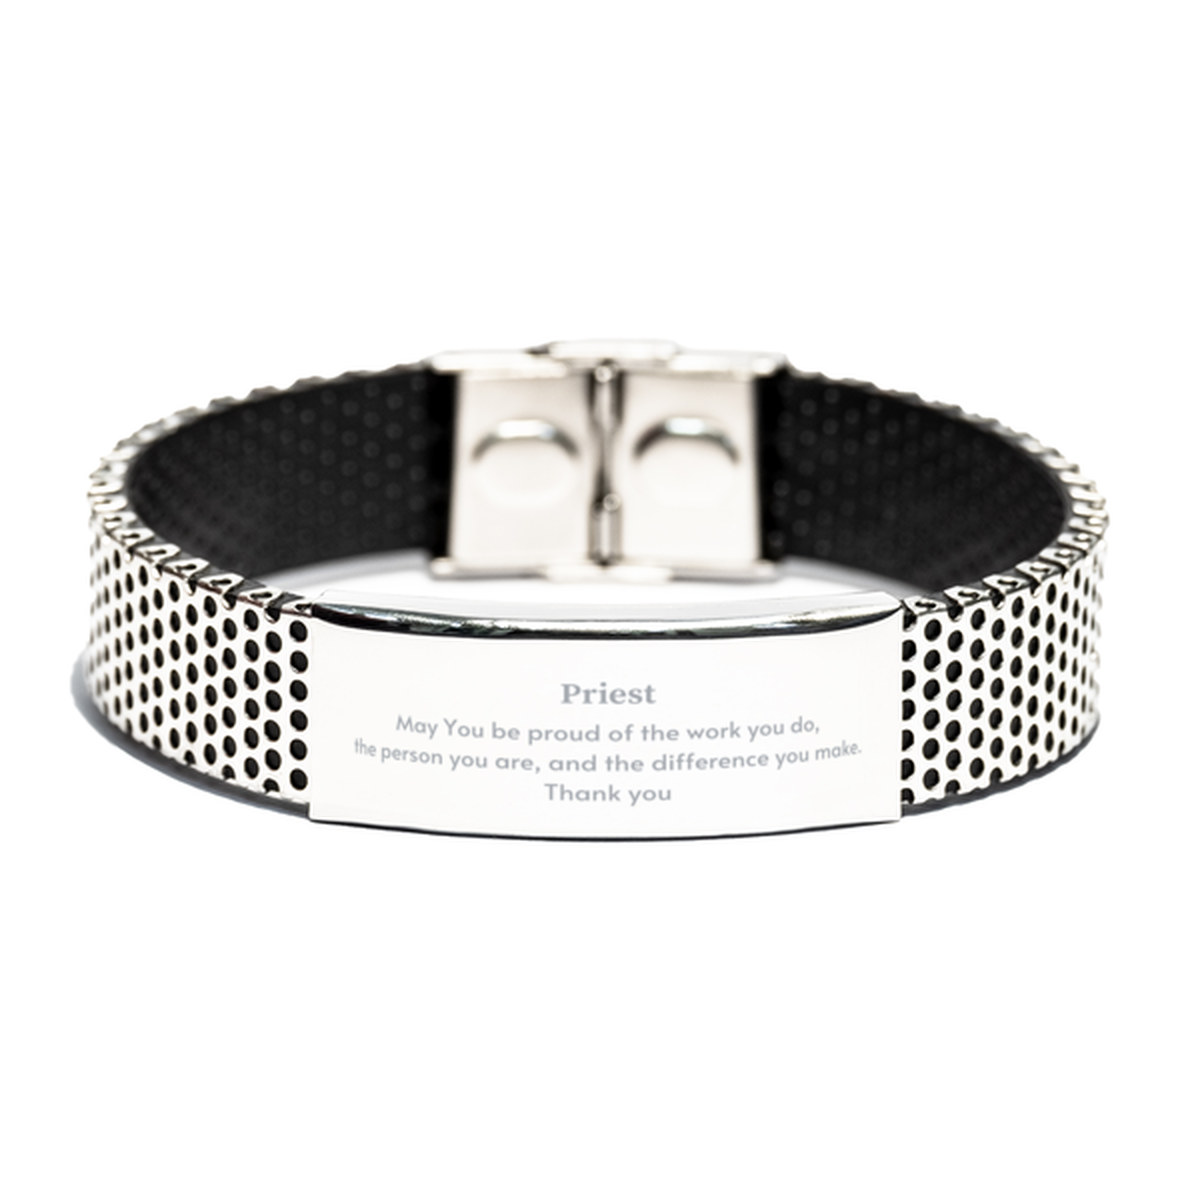 Heartwarming Stainless Steel Bracelet Retirement Coworkers Gifts for Priest, Priest May You be proud of the work you do, the person you are Gifts for Boss Men Women Friends